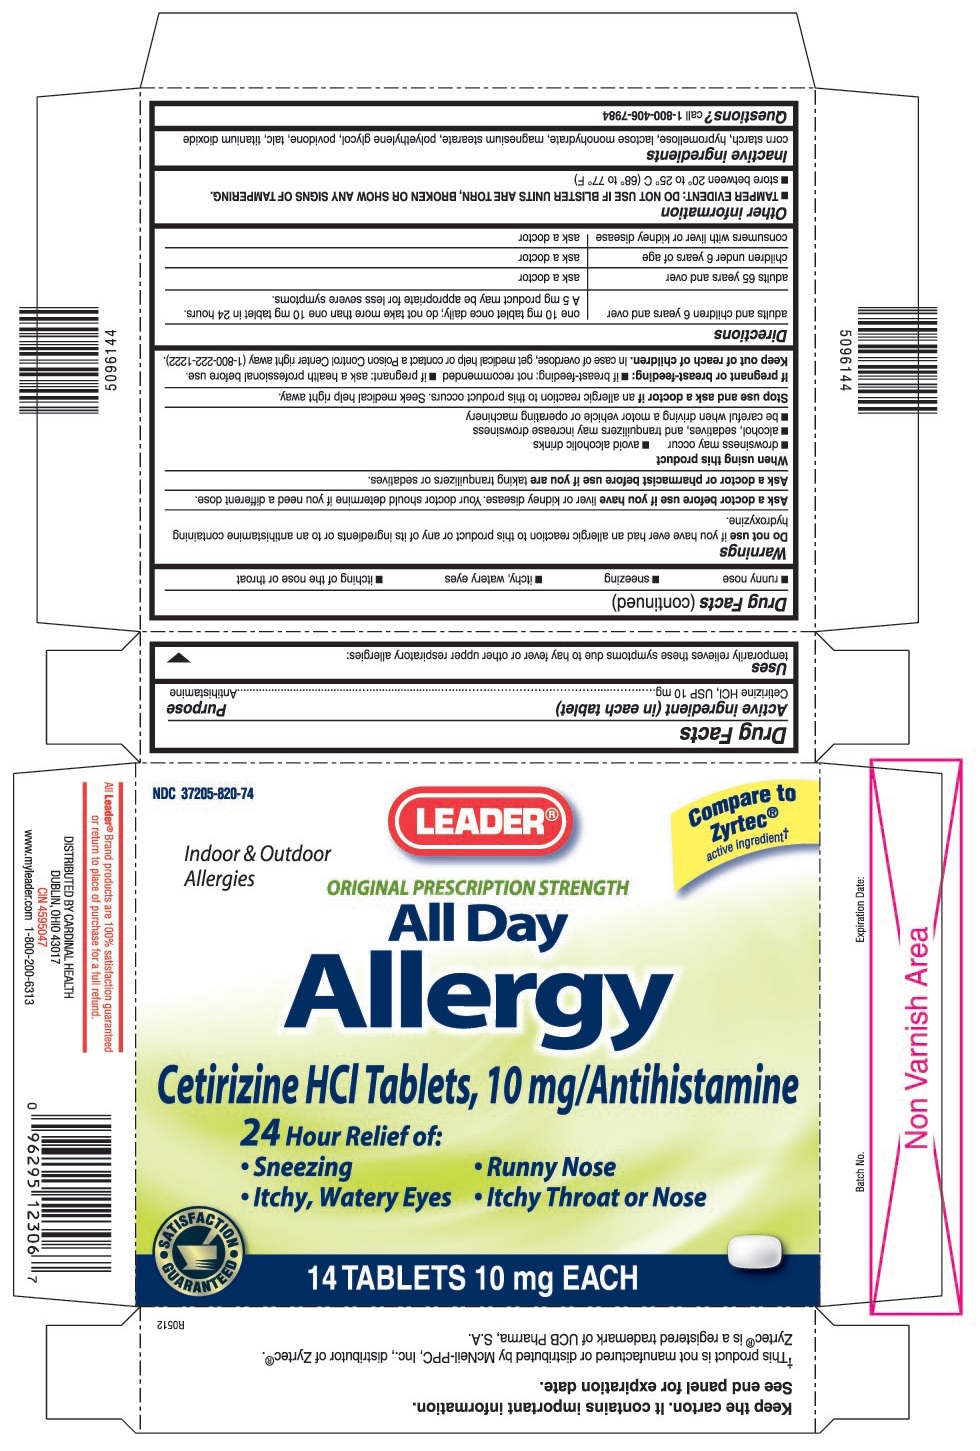 This is the 14 count blister carton label for Leader Cetirizine.